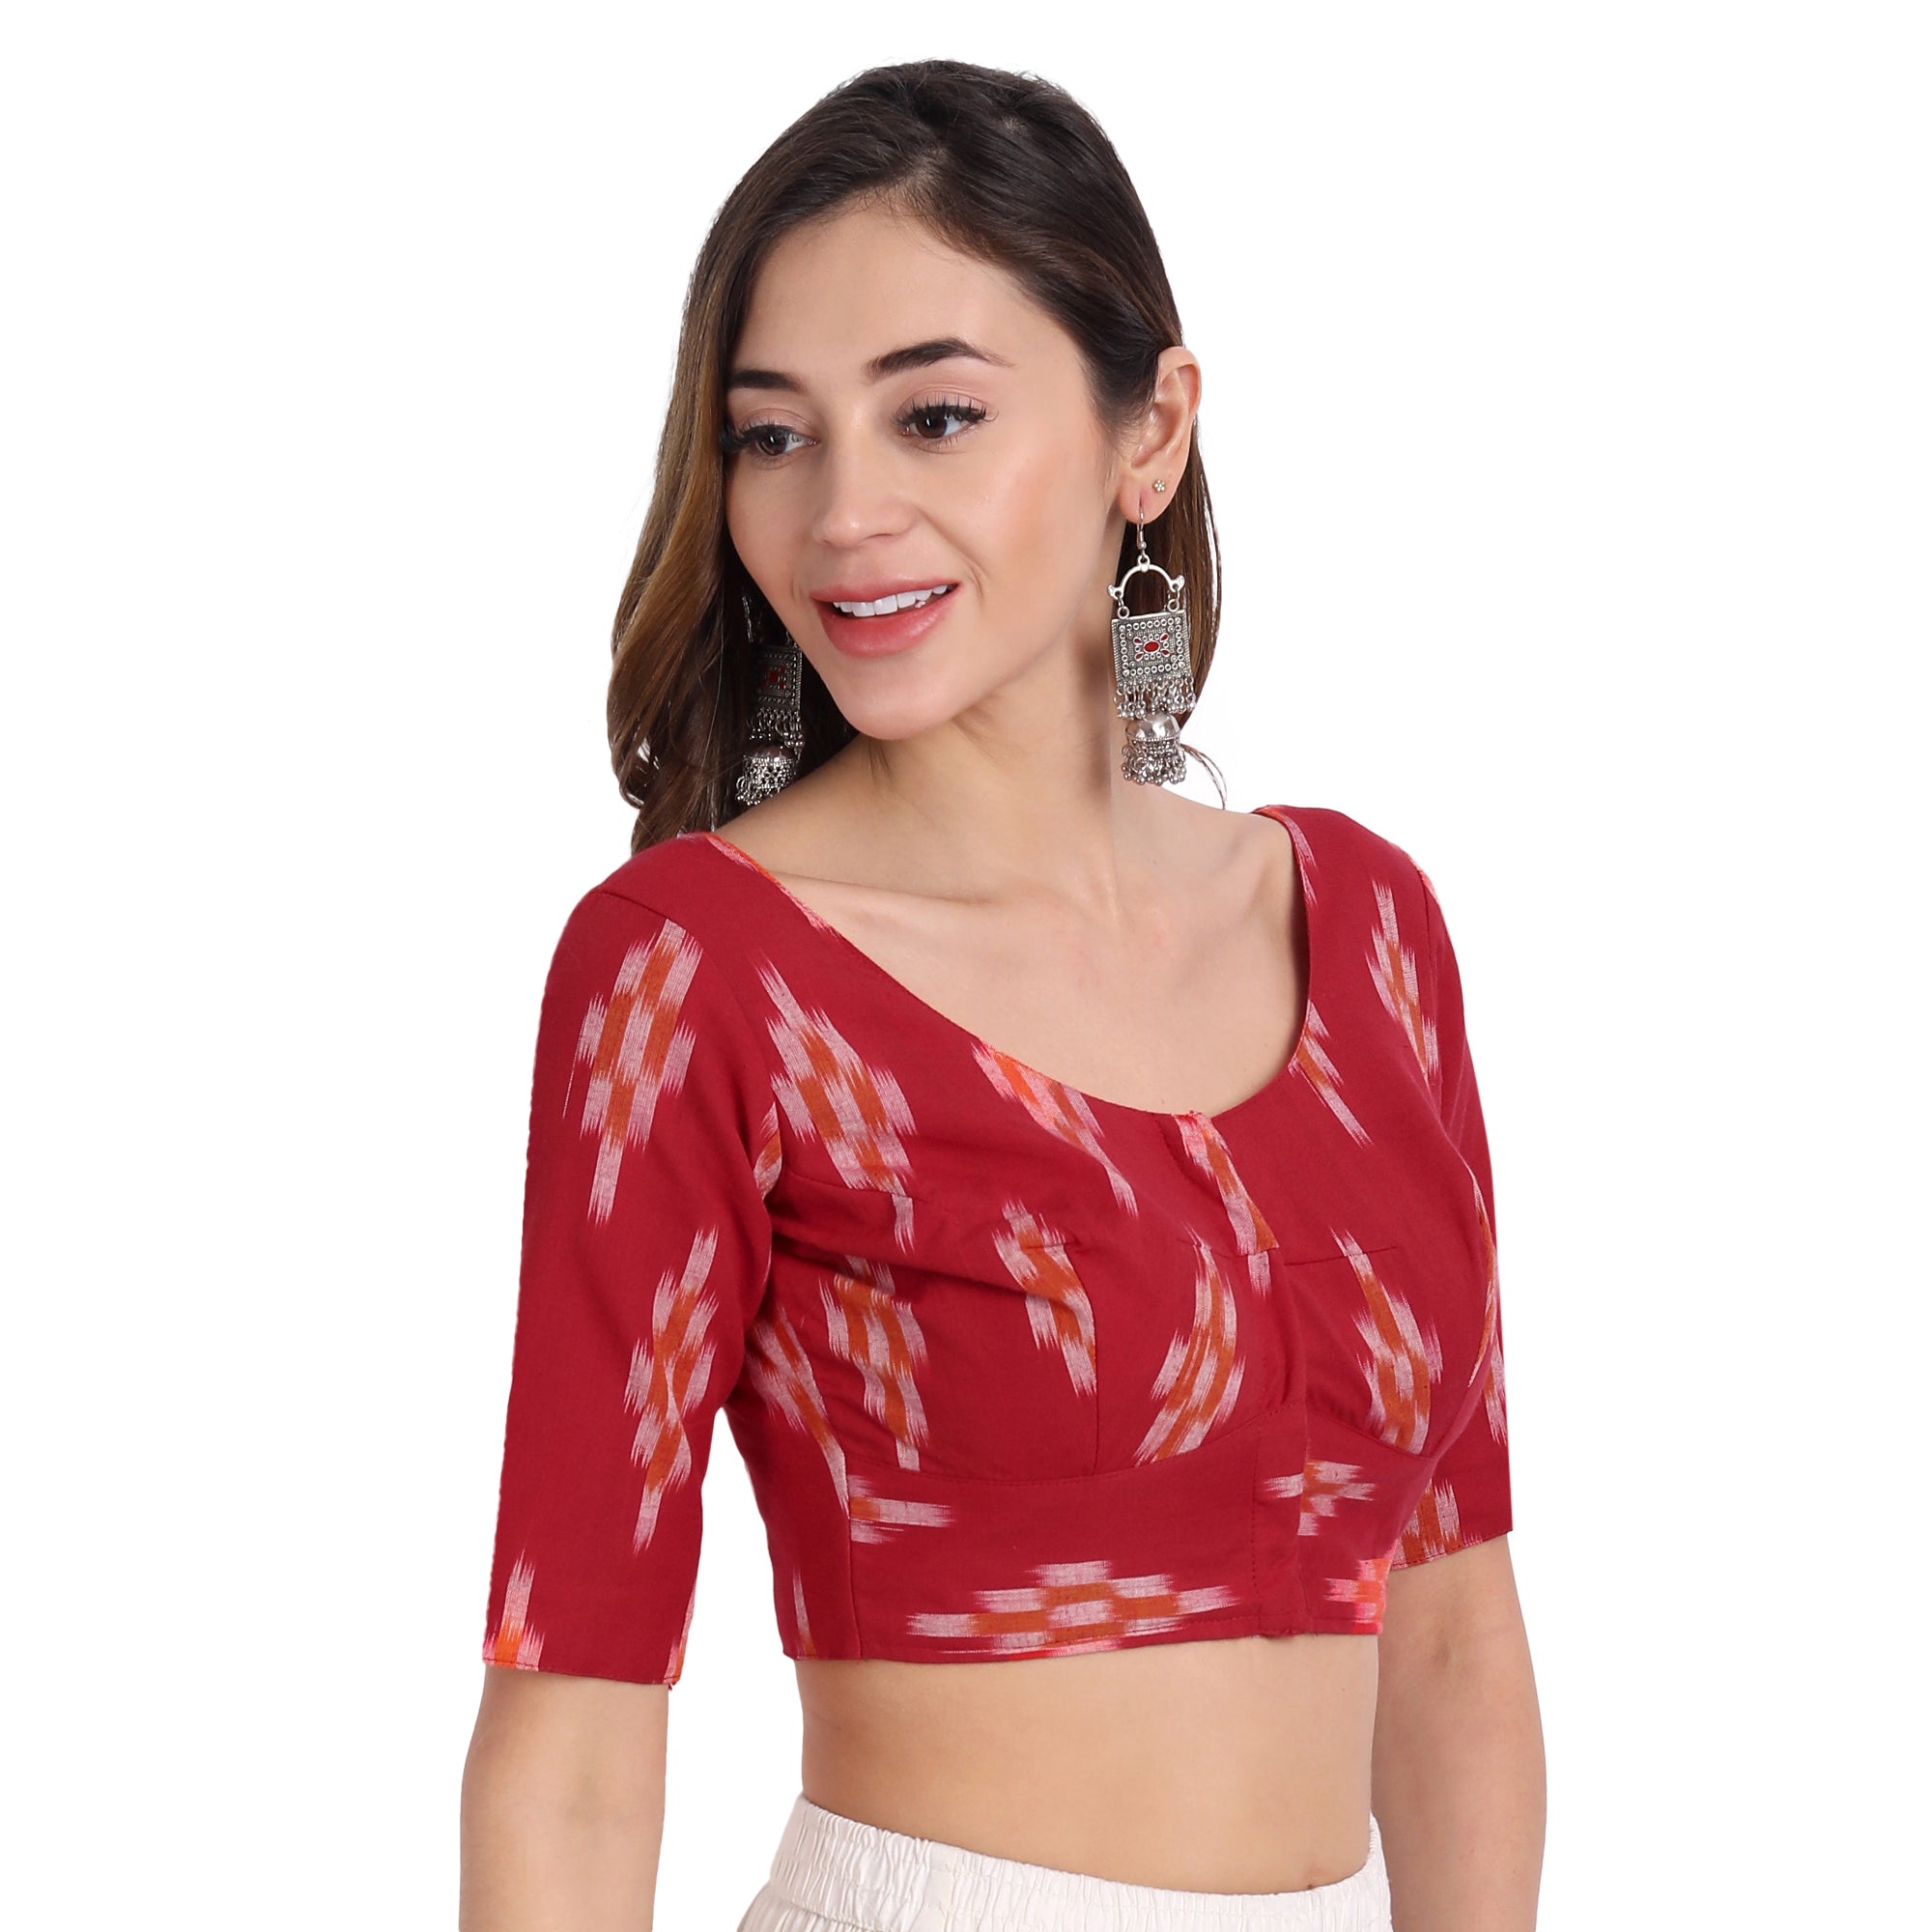 Ikkat Normal Cotton Elbow Length Sleeve Blouse, Red